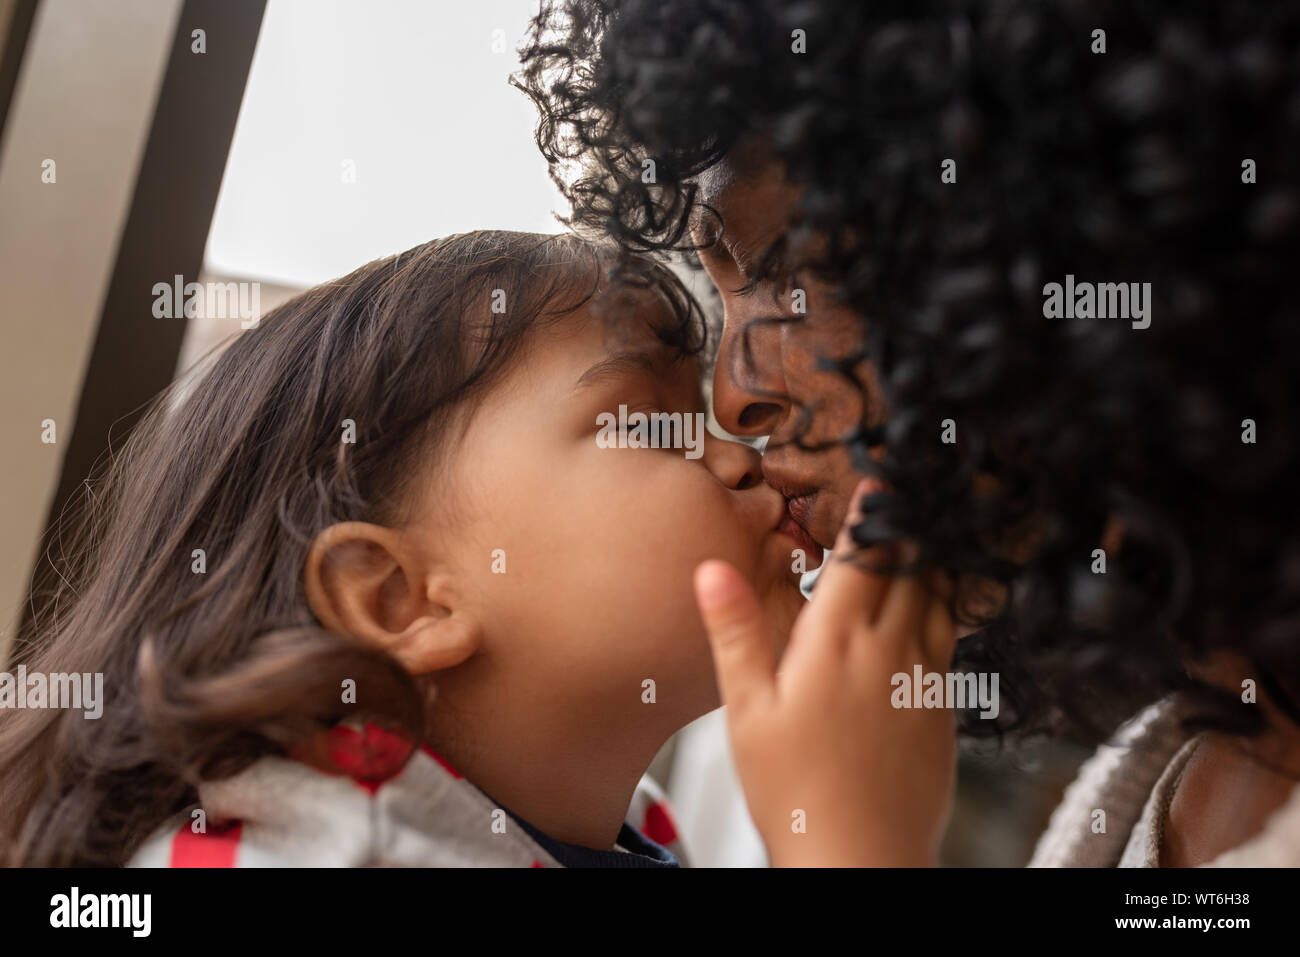 Adorable little girl giving her mother a kiss Stock Photo